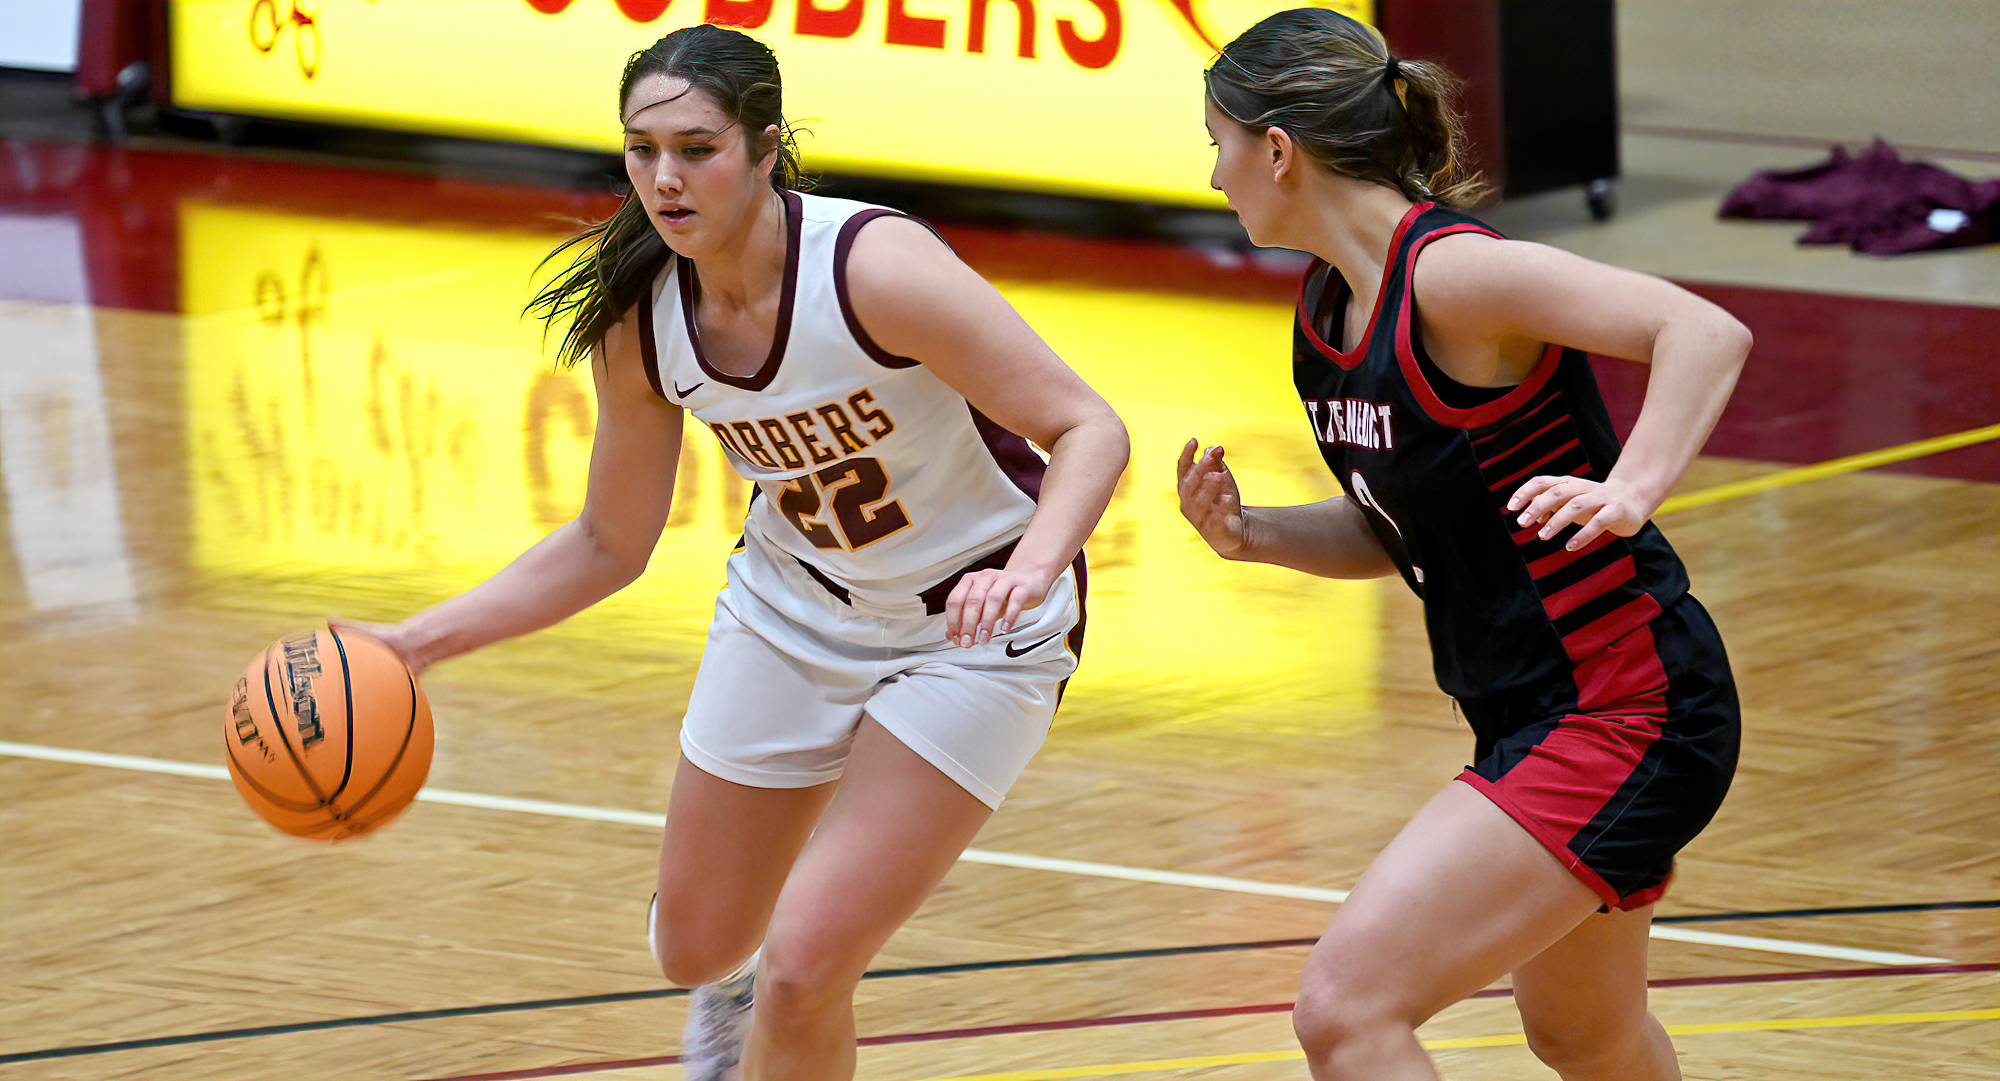 Makayla Anderson drives to the basket on the way to scoring two of her career-high 25 points in the Cobbers' win over St. Benedict.